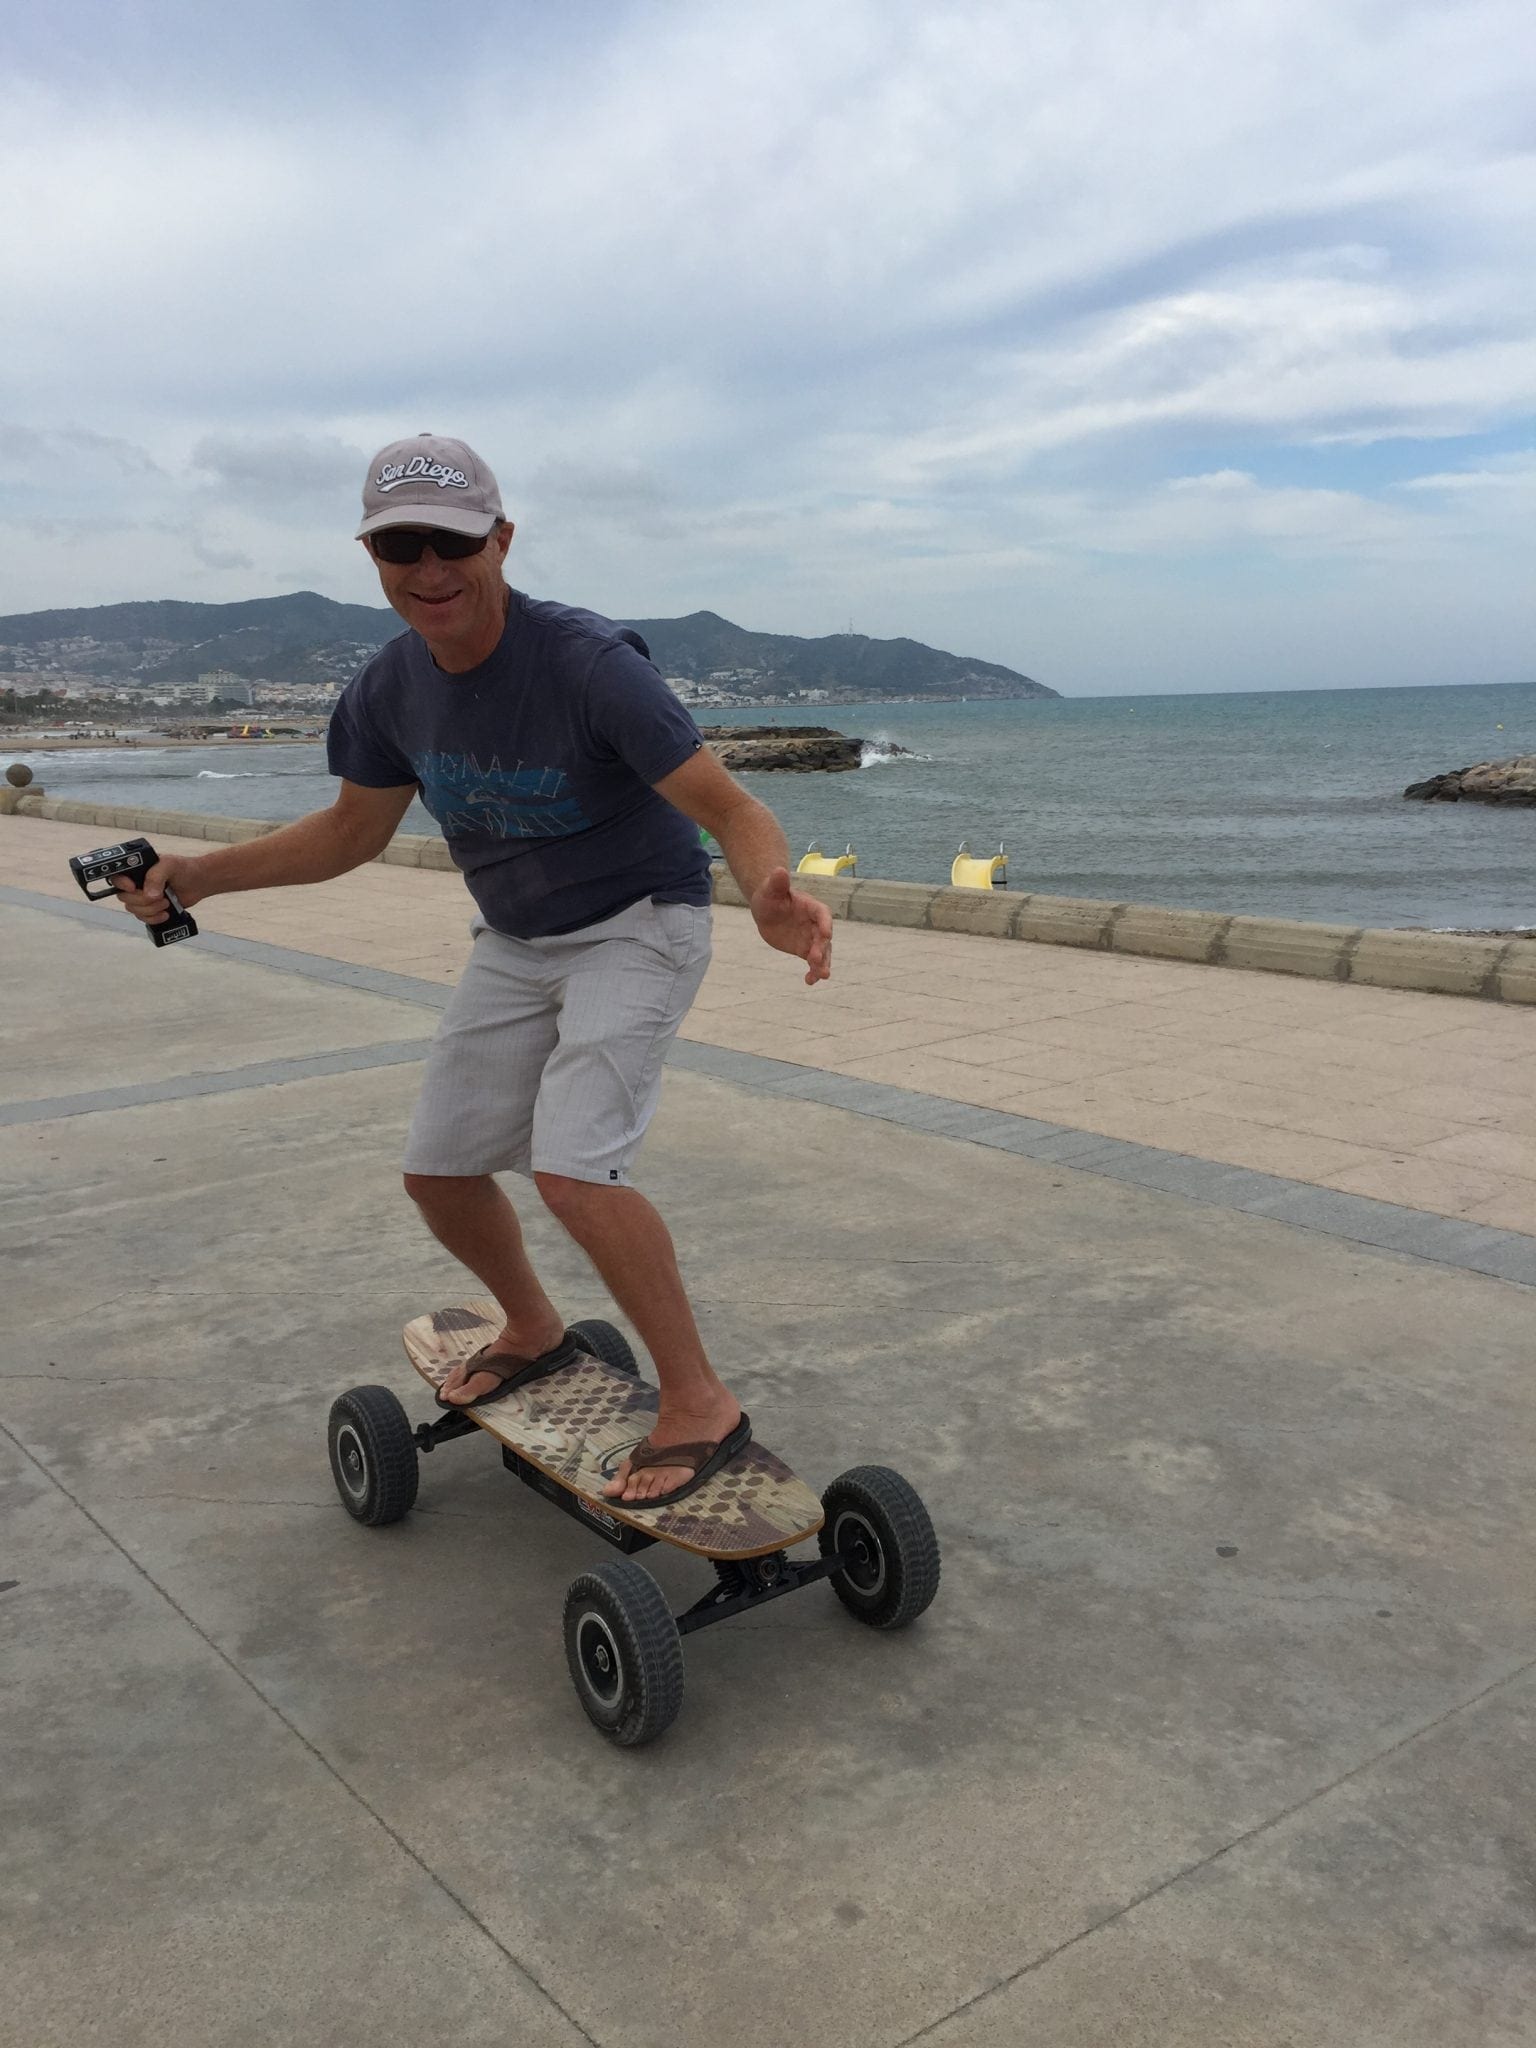 The skateboard goes about 20 km per hour!